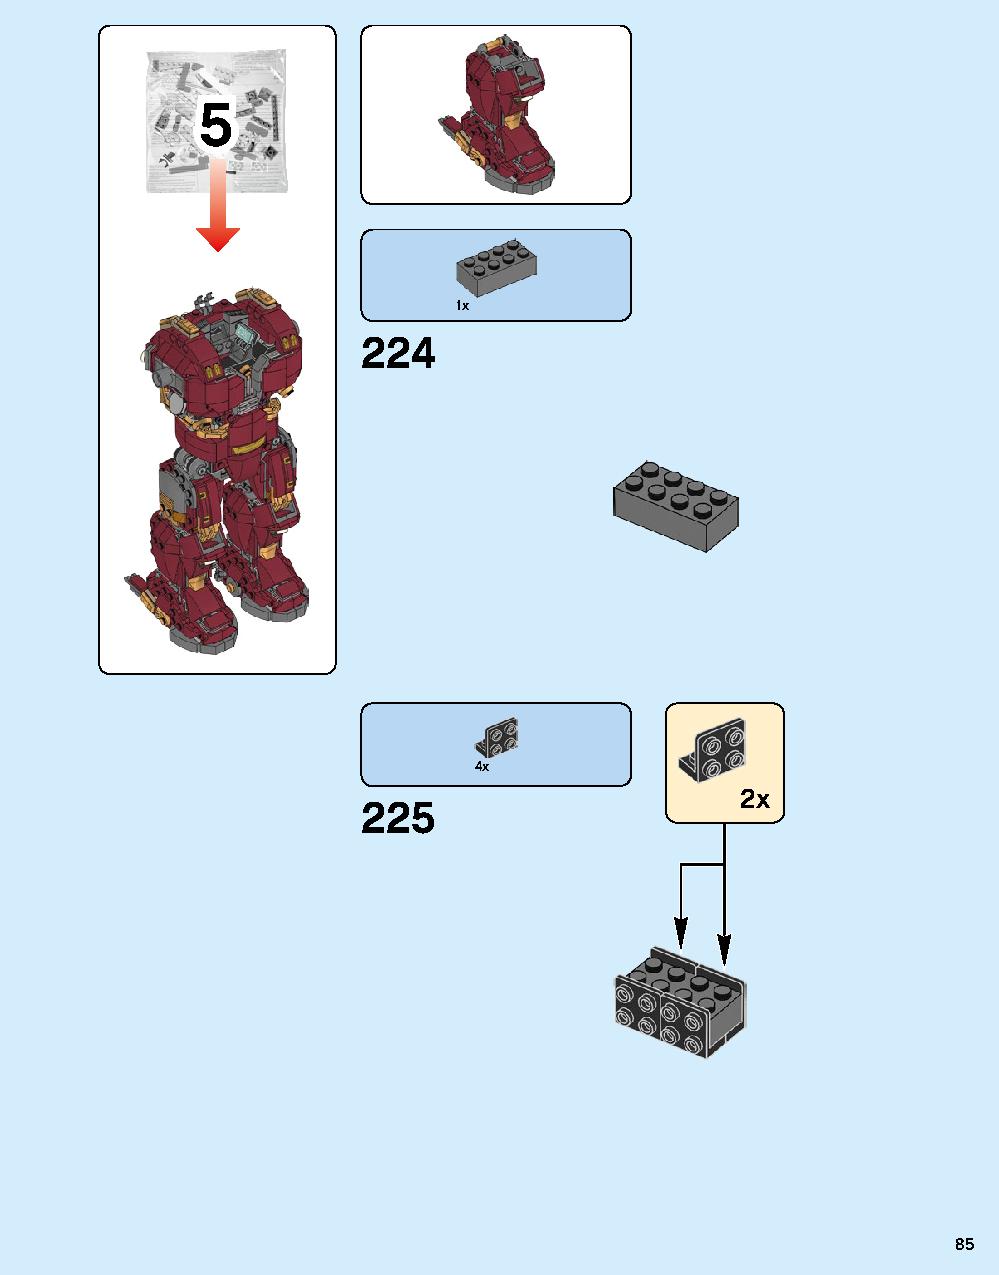 The Hulkbuster: Ultron Edition 76105 LEGO information LEGO instructions 85 page